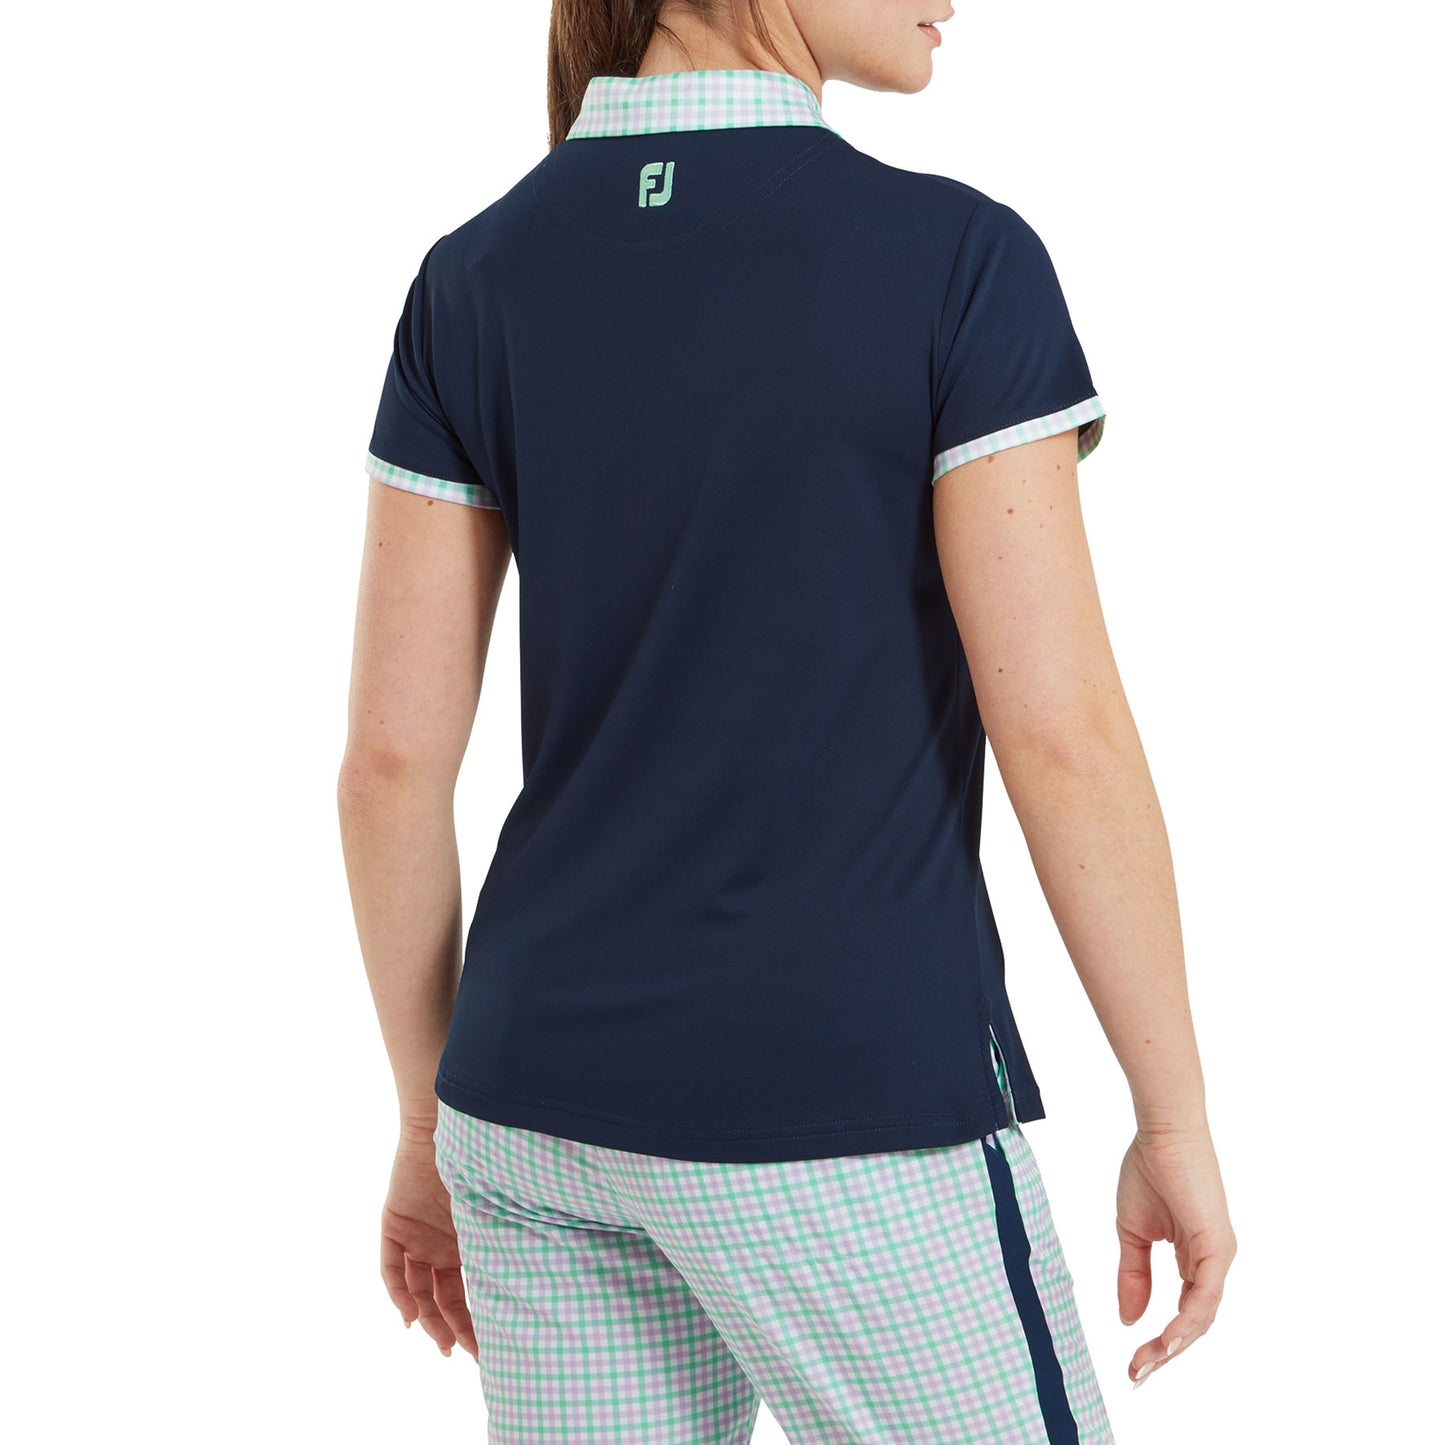 FootJoy Ladies Pique Polo in Navy with Gingham Print Trim